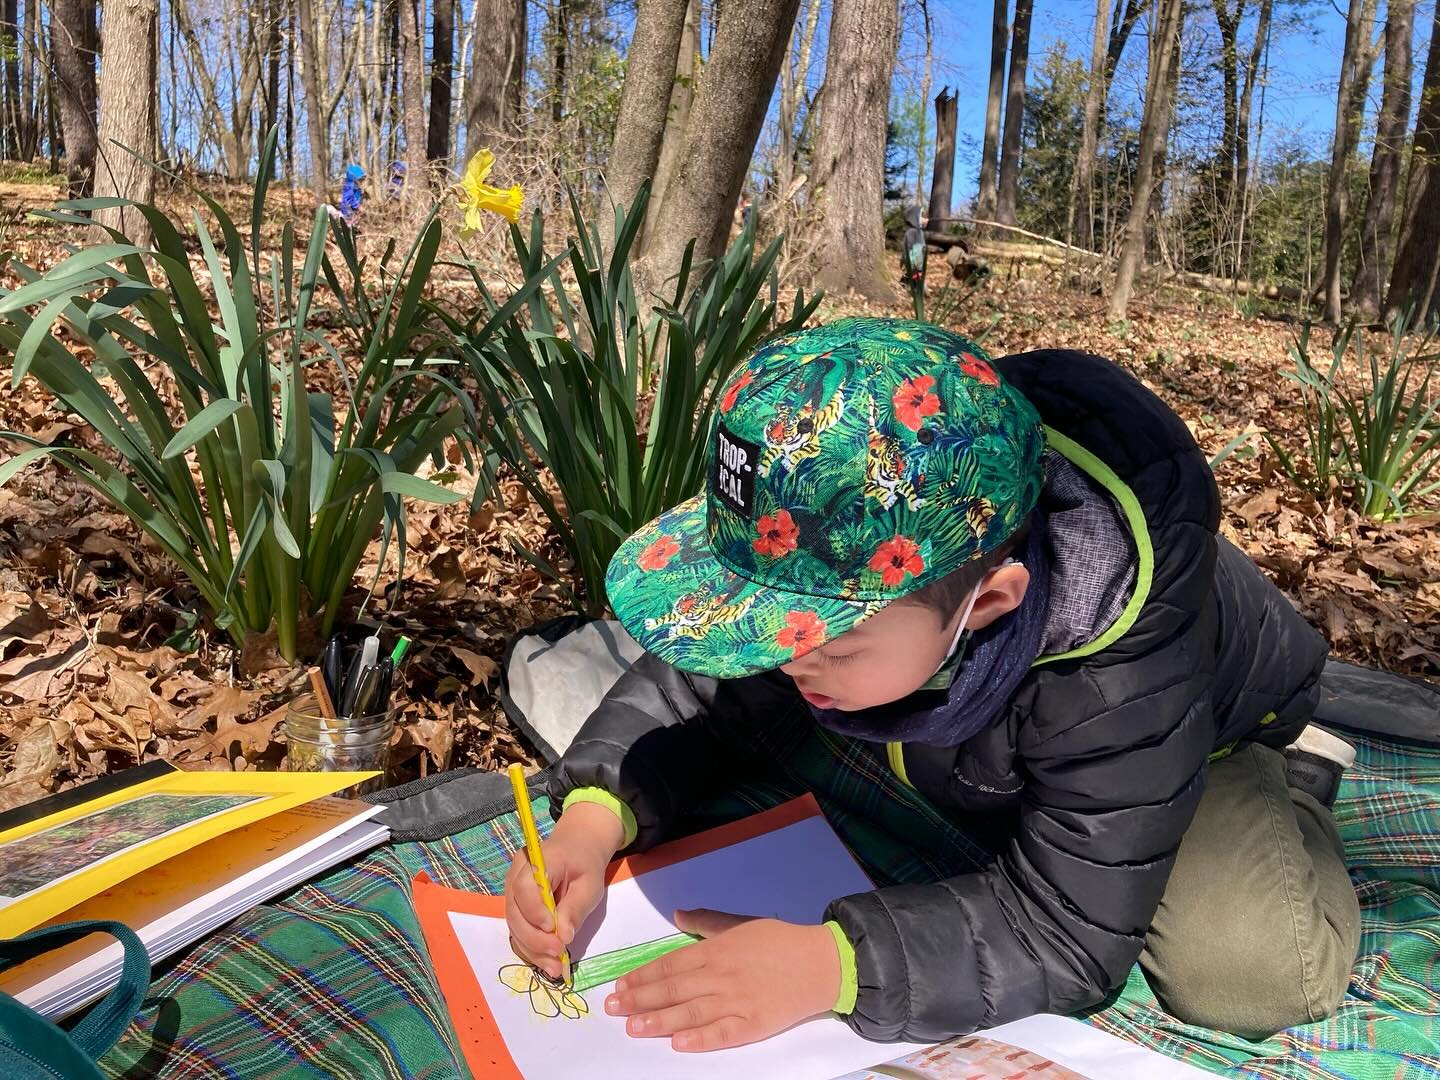 Nursery students document spring by drawing daffodils in their Nature Journals. #preschool #commonschool #amherstma